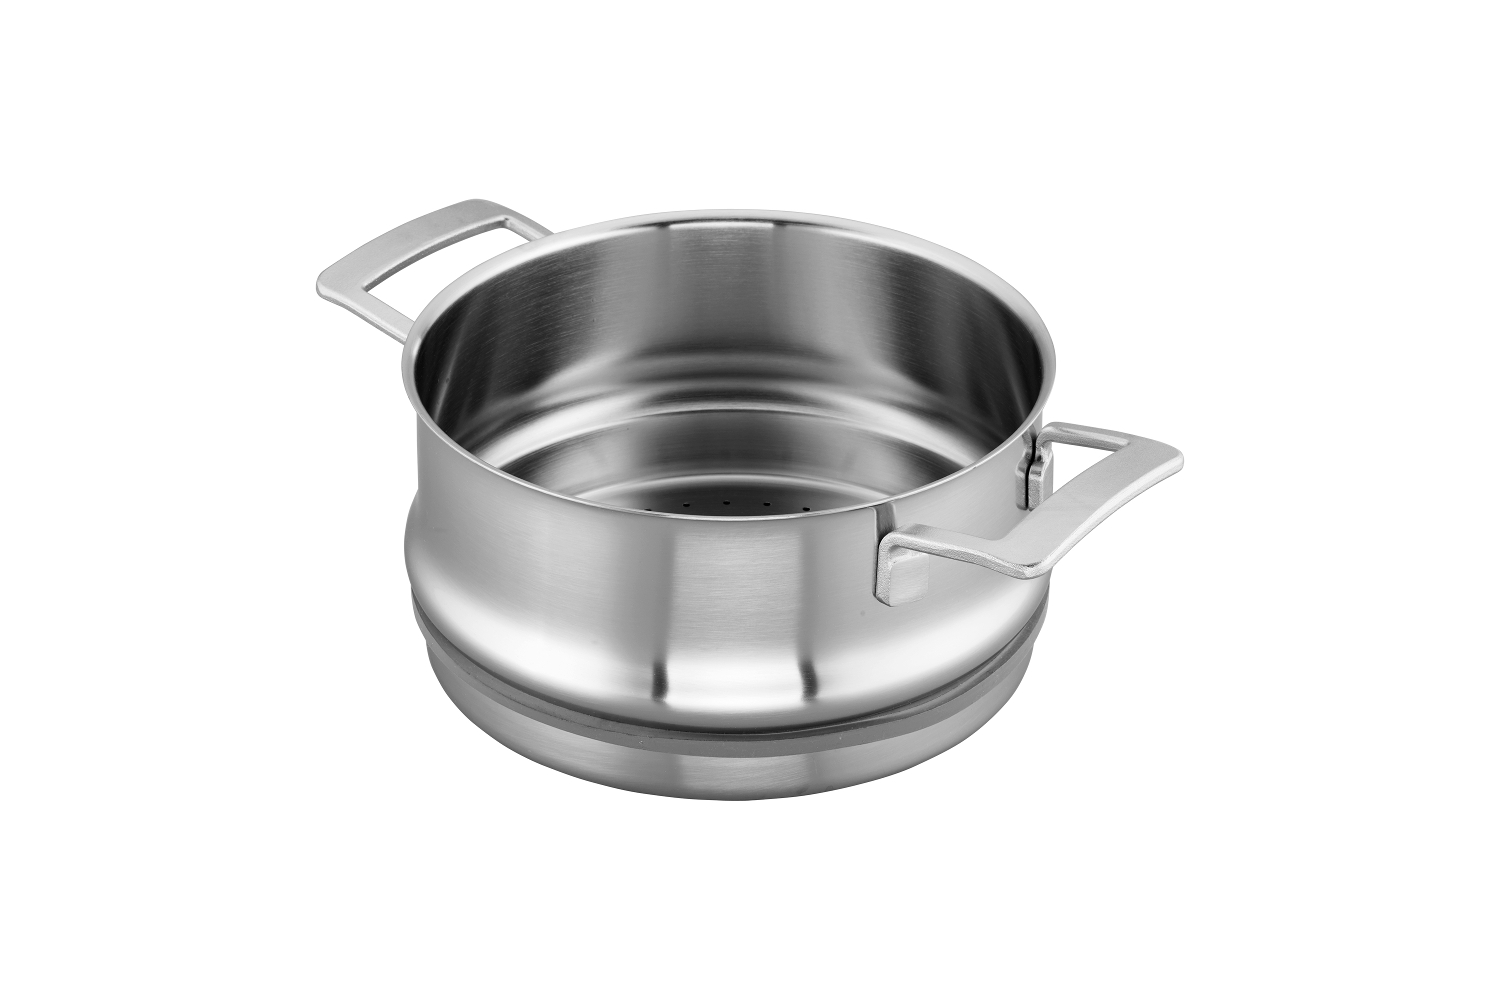 Demeyere Industry5 8 Quart Stock Pot with Lid